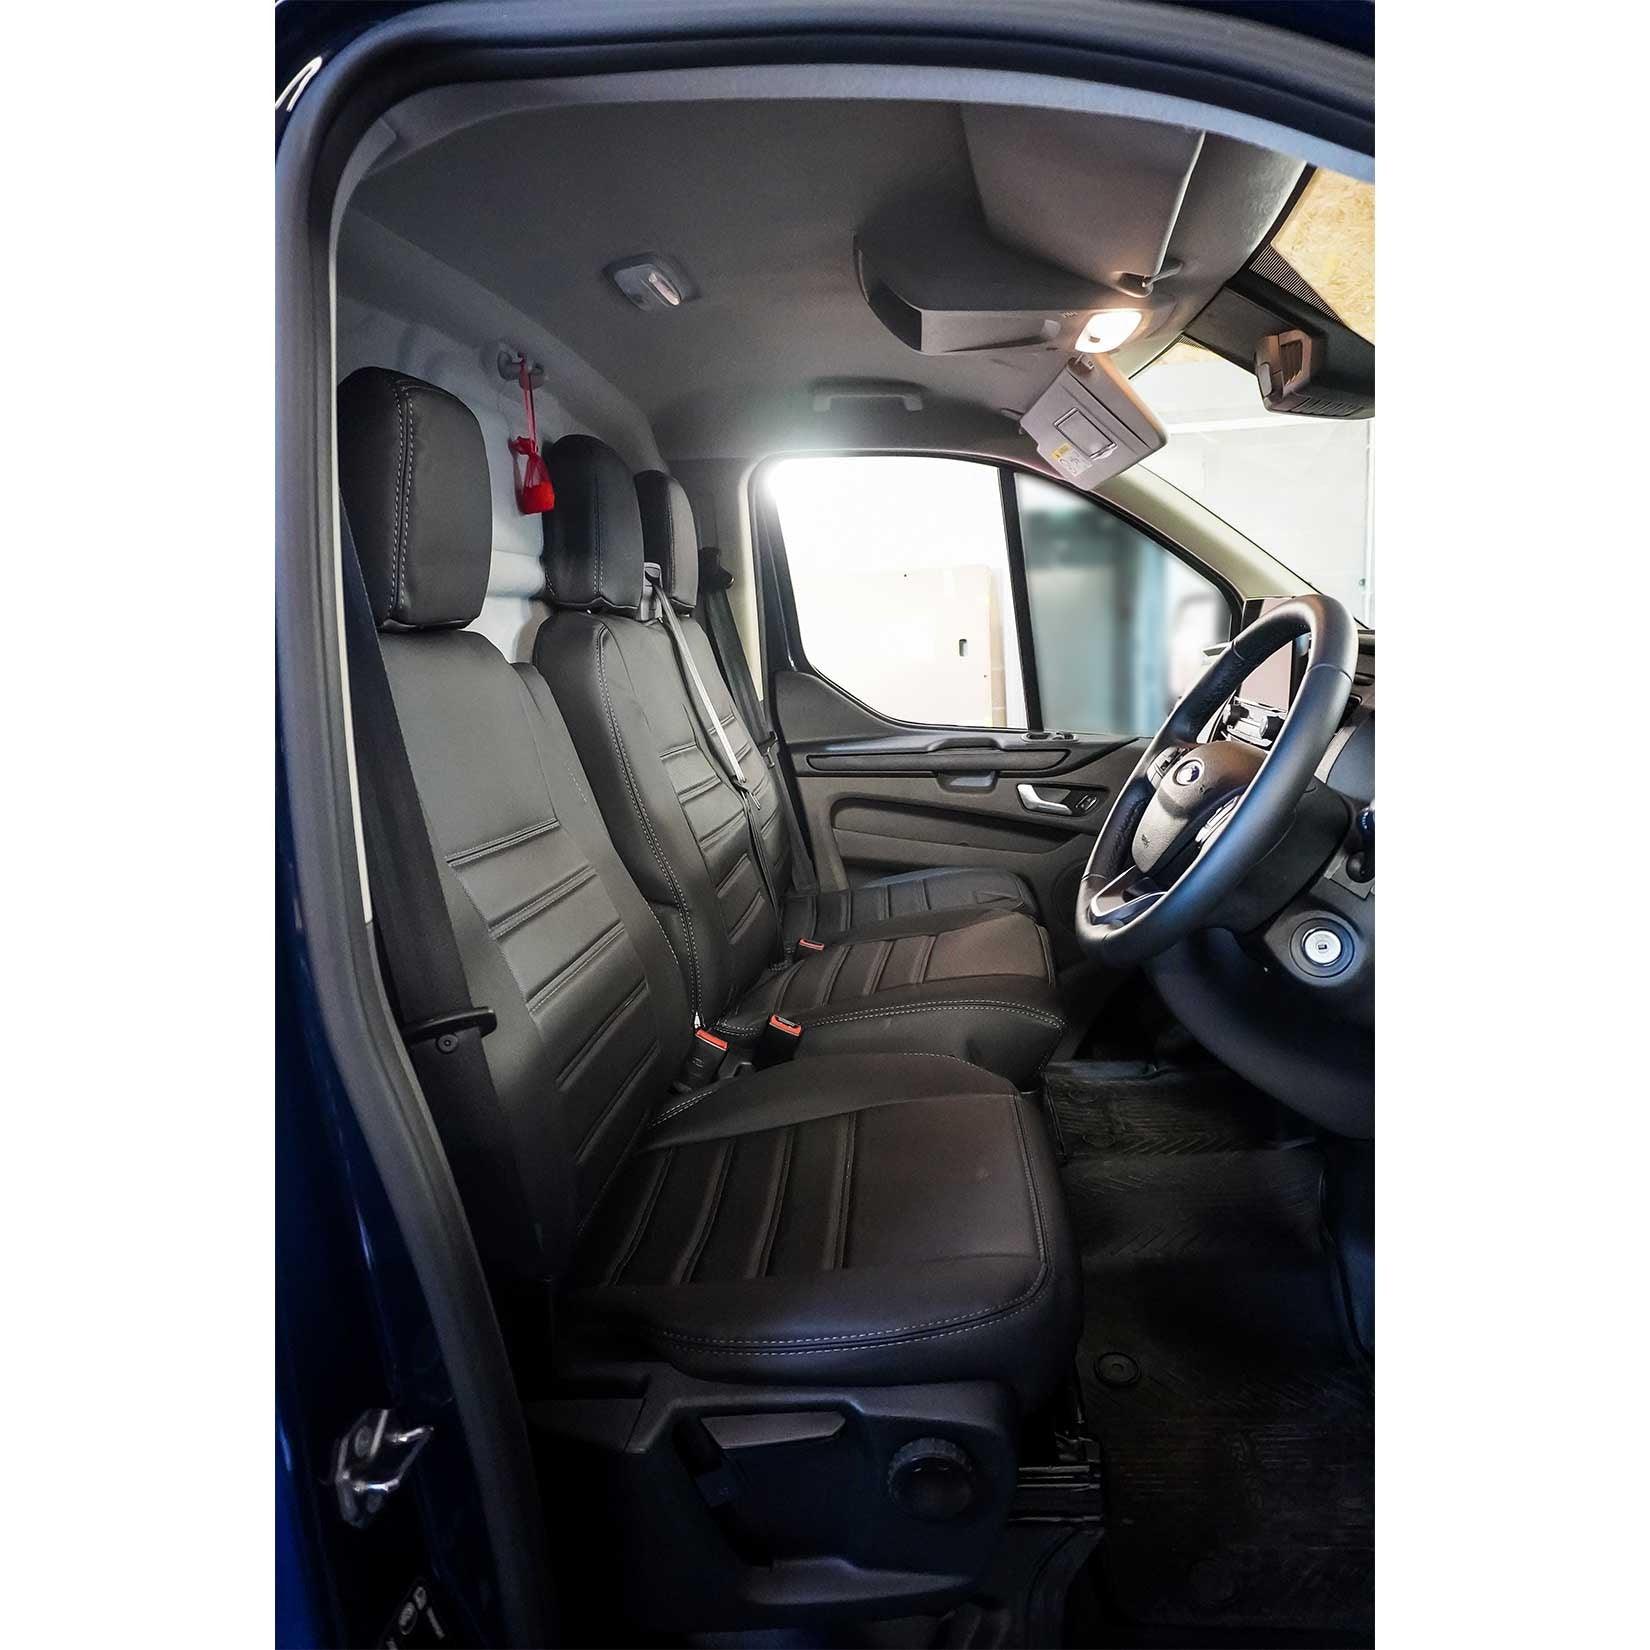 FORD TRANSIT CUSTOM 2012 ON FRONT DRIVER & DOUBLE PASSENGER SEAT COVERS - PU LEATHER IN BLACK - Storm Xccessories2